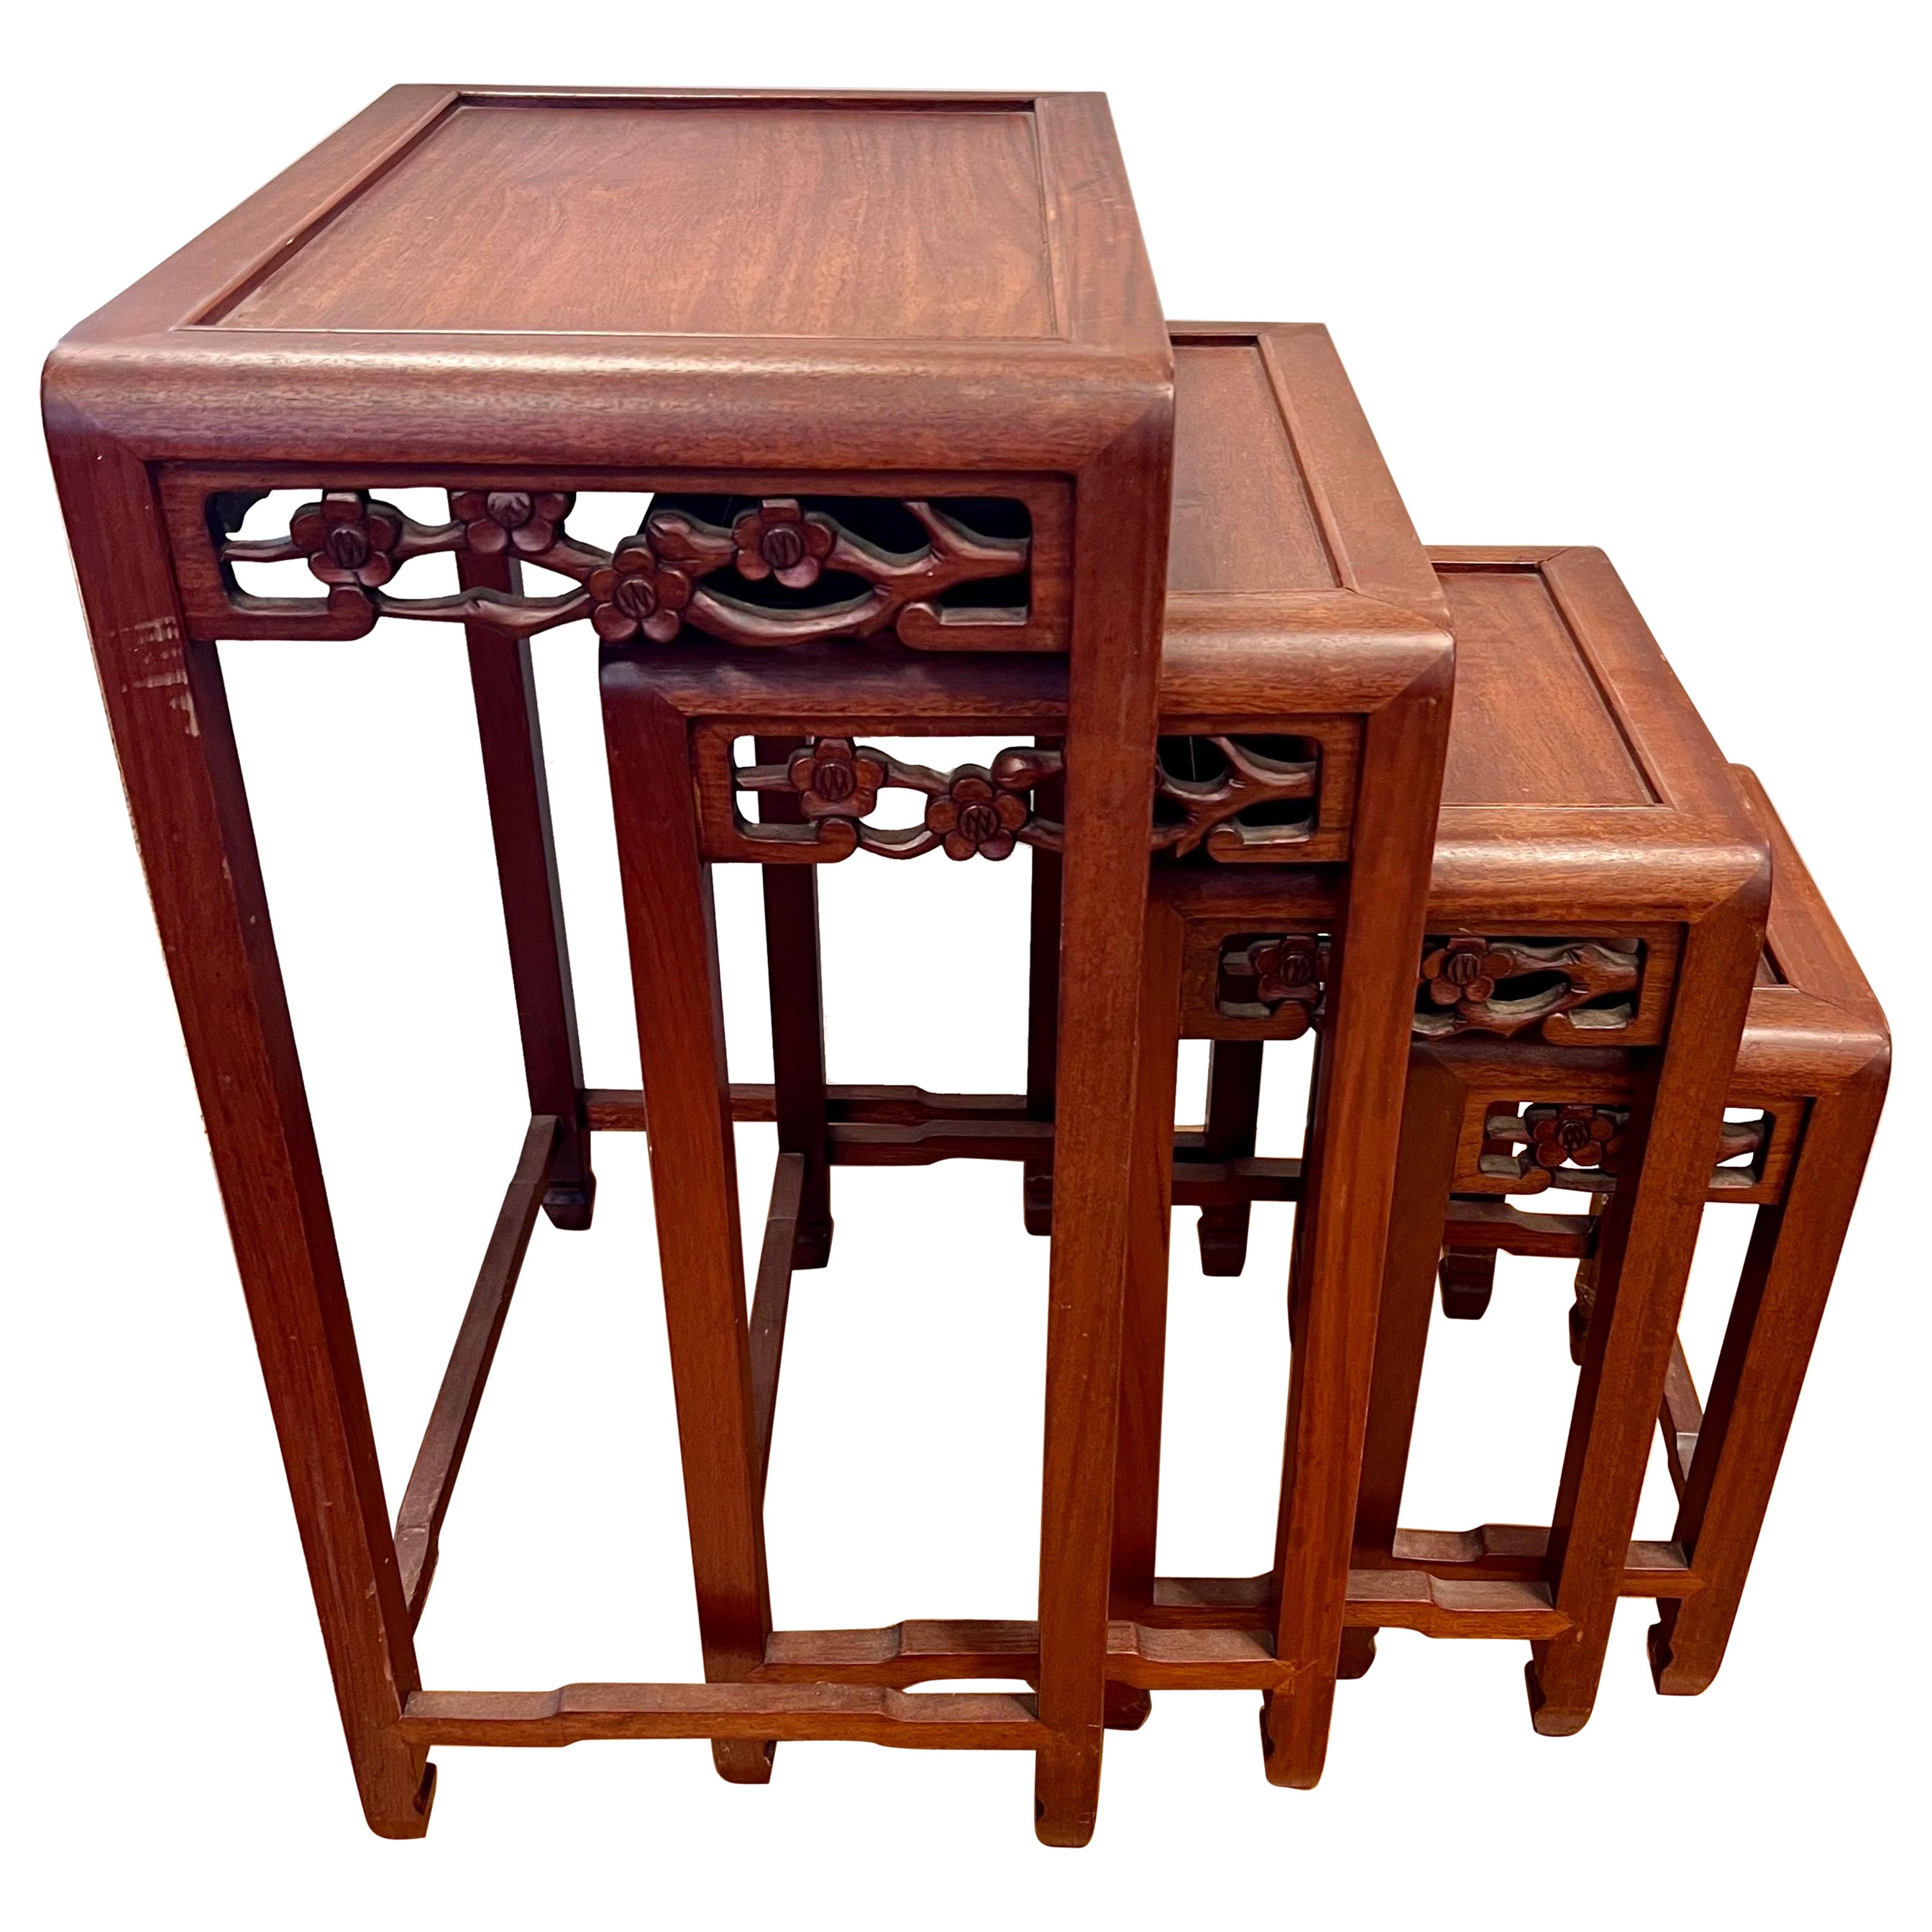 Set of 4 Chinese Asian Carved Nesting Tables Chinoiserie Mid-Century Modern